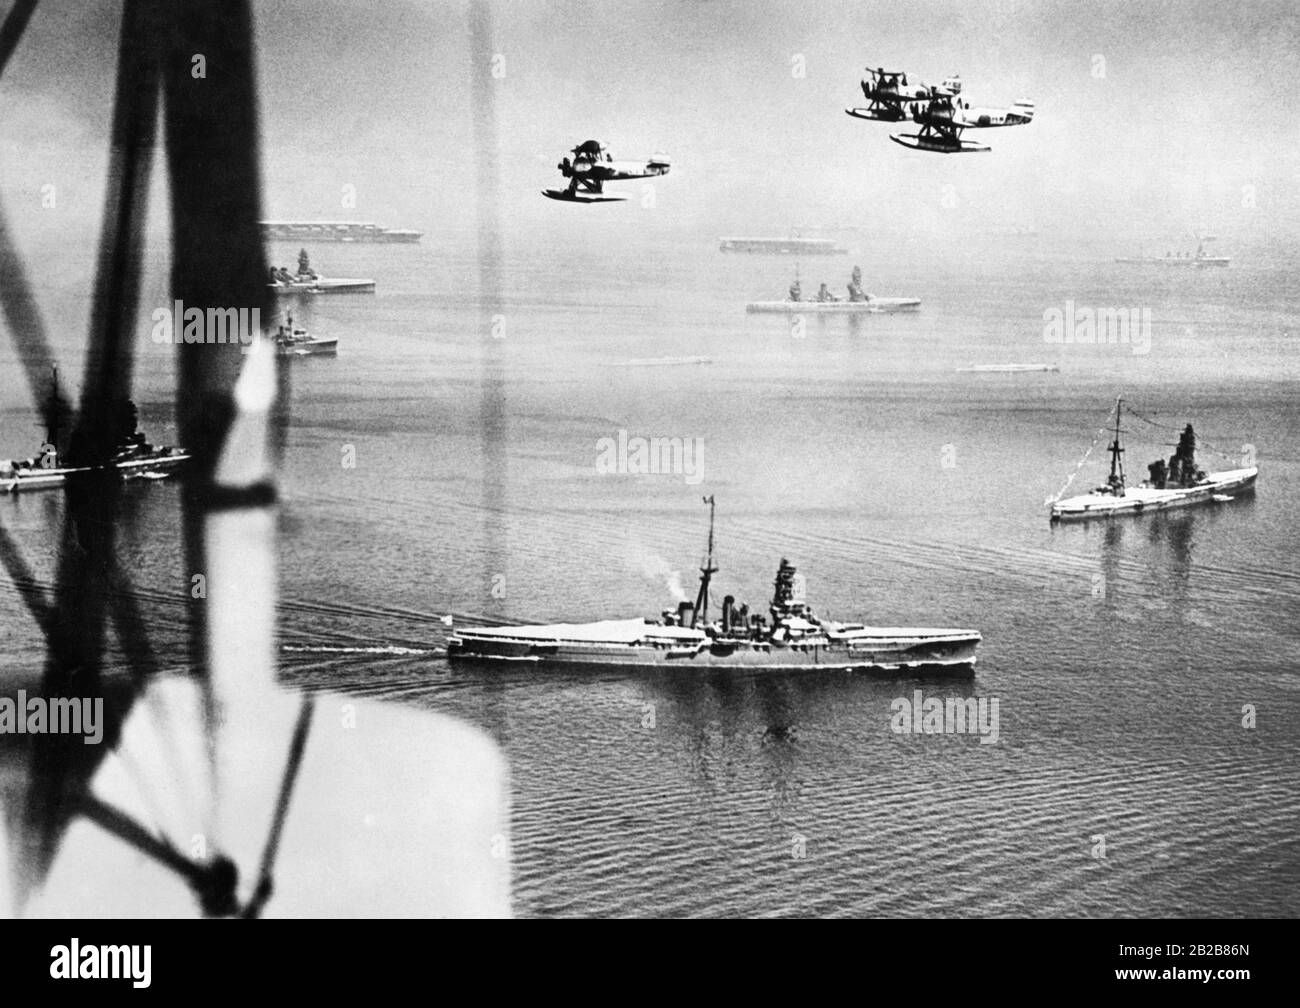 View over the sea near Yokohama in Japan during a parade of the Imperial Japanese Navy on August 28, 1939. In the foreground are some destroyers of the Navy as well as airplanes flying above. In the background in the fog are two aircraft carriers. Stock Photo